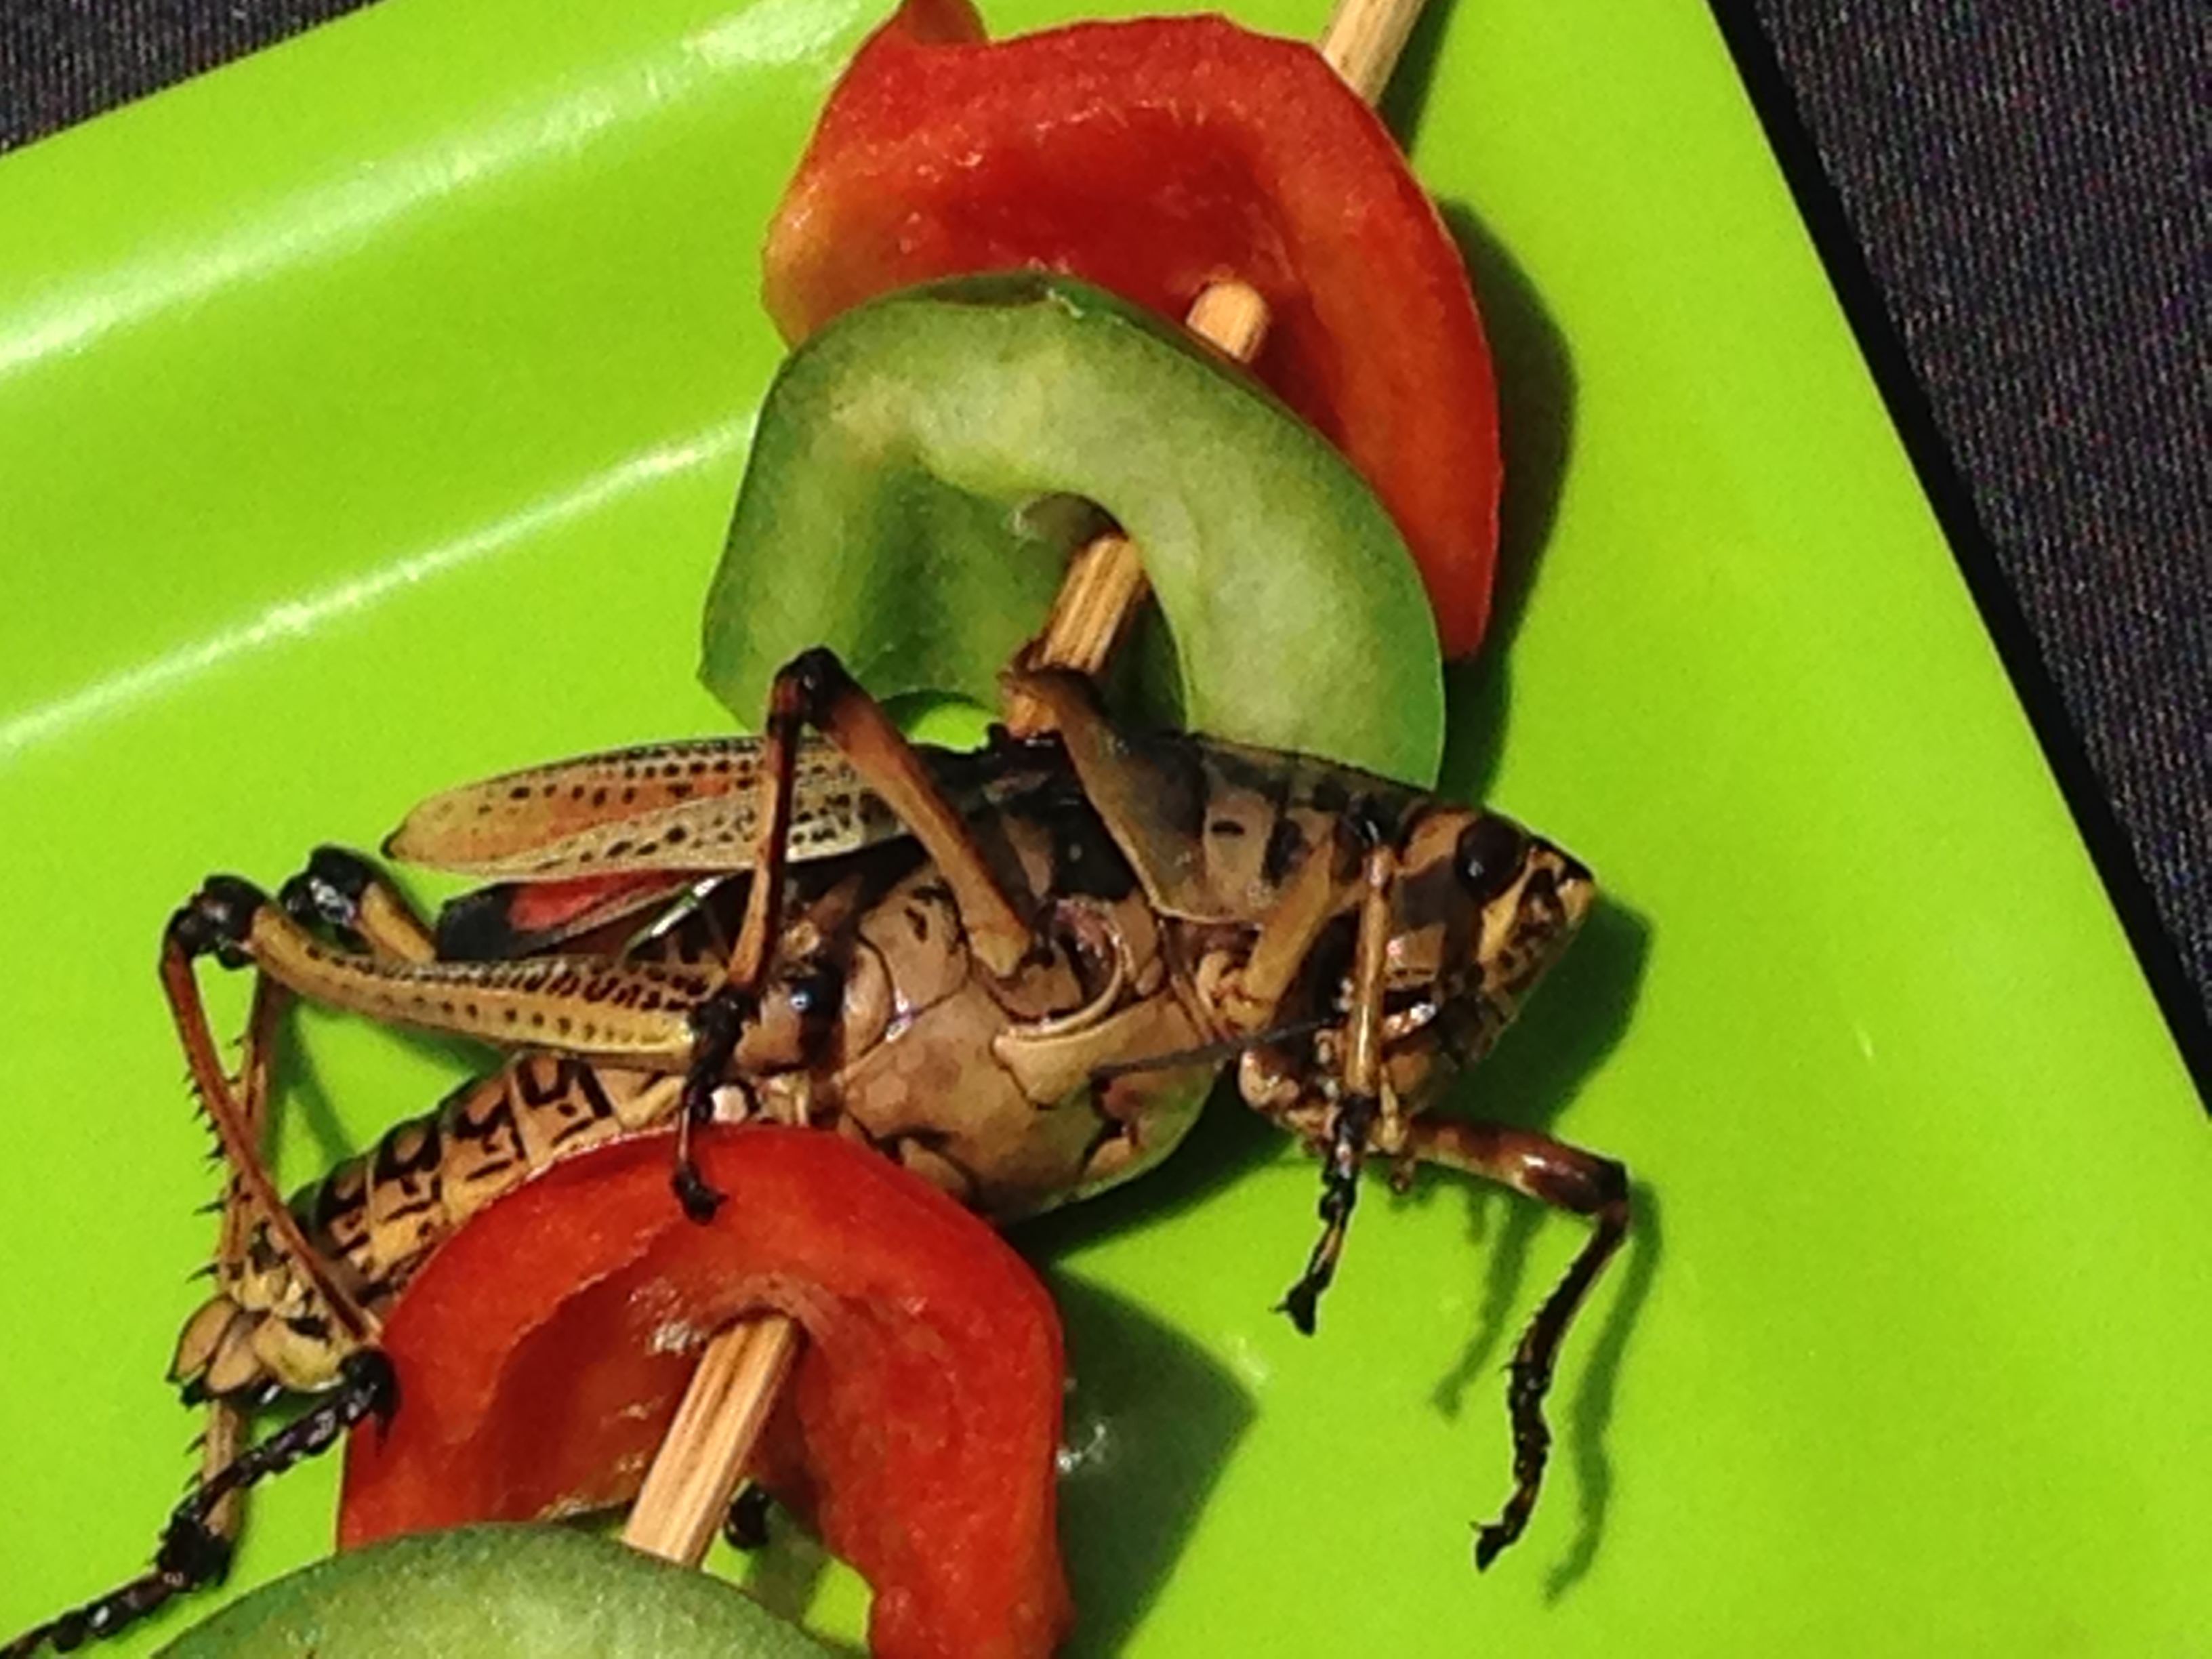 8 Edible Bugs That Could Help You Survive - Eat Tomorrow Blog